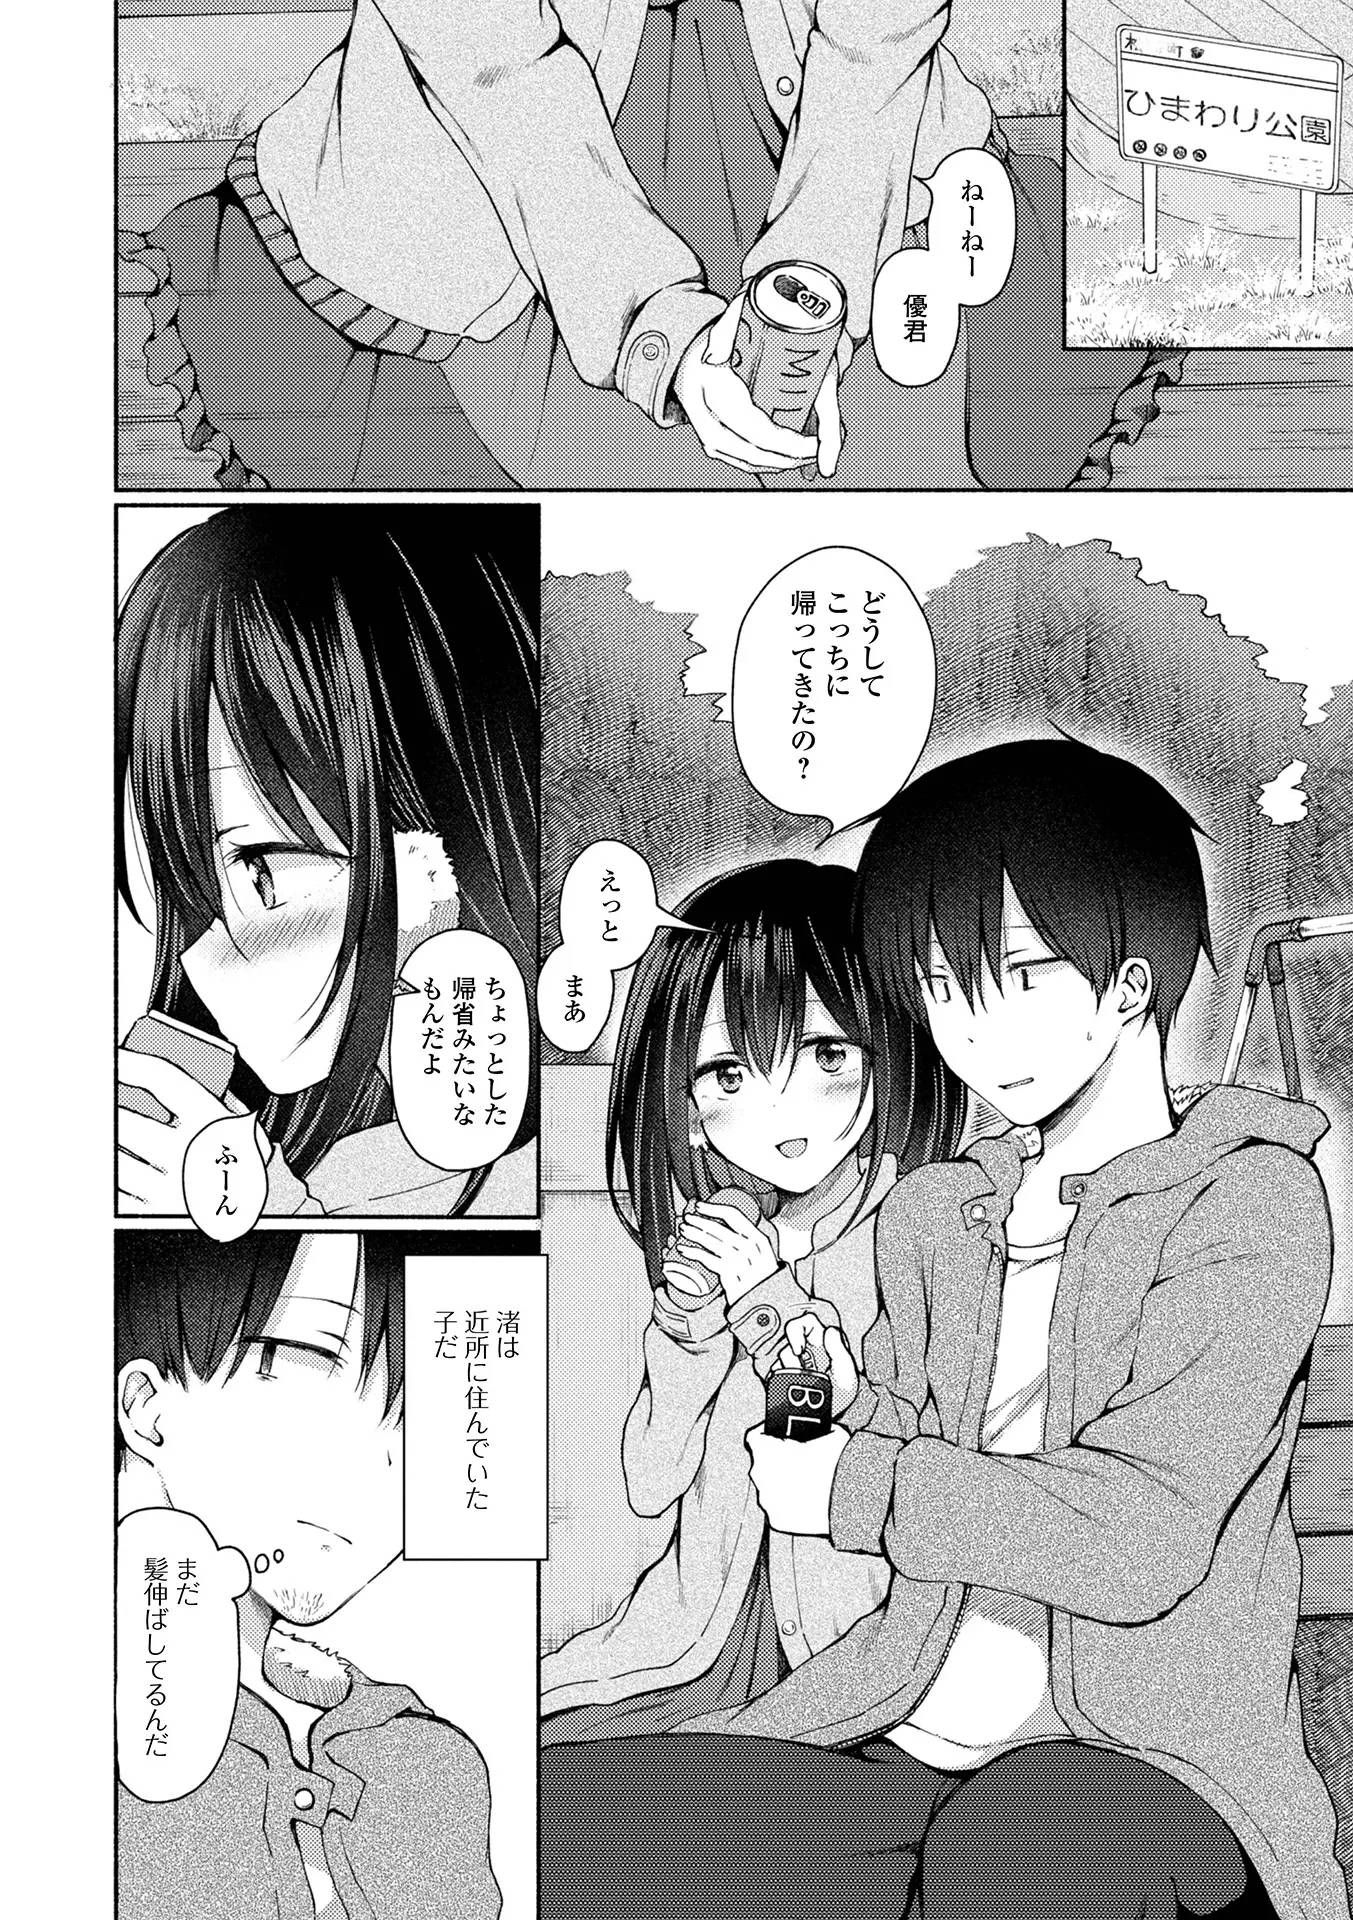 【Image】 Mr. Mann who saw the face of his childhood friend for the first time in a long time, becomes a female face www 2